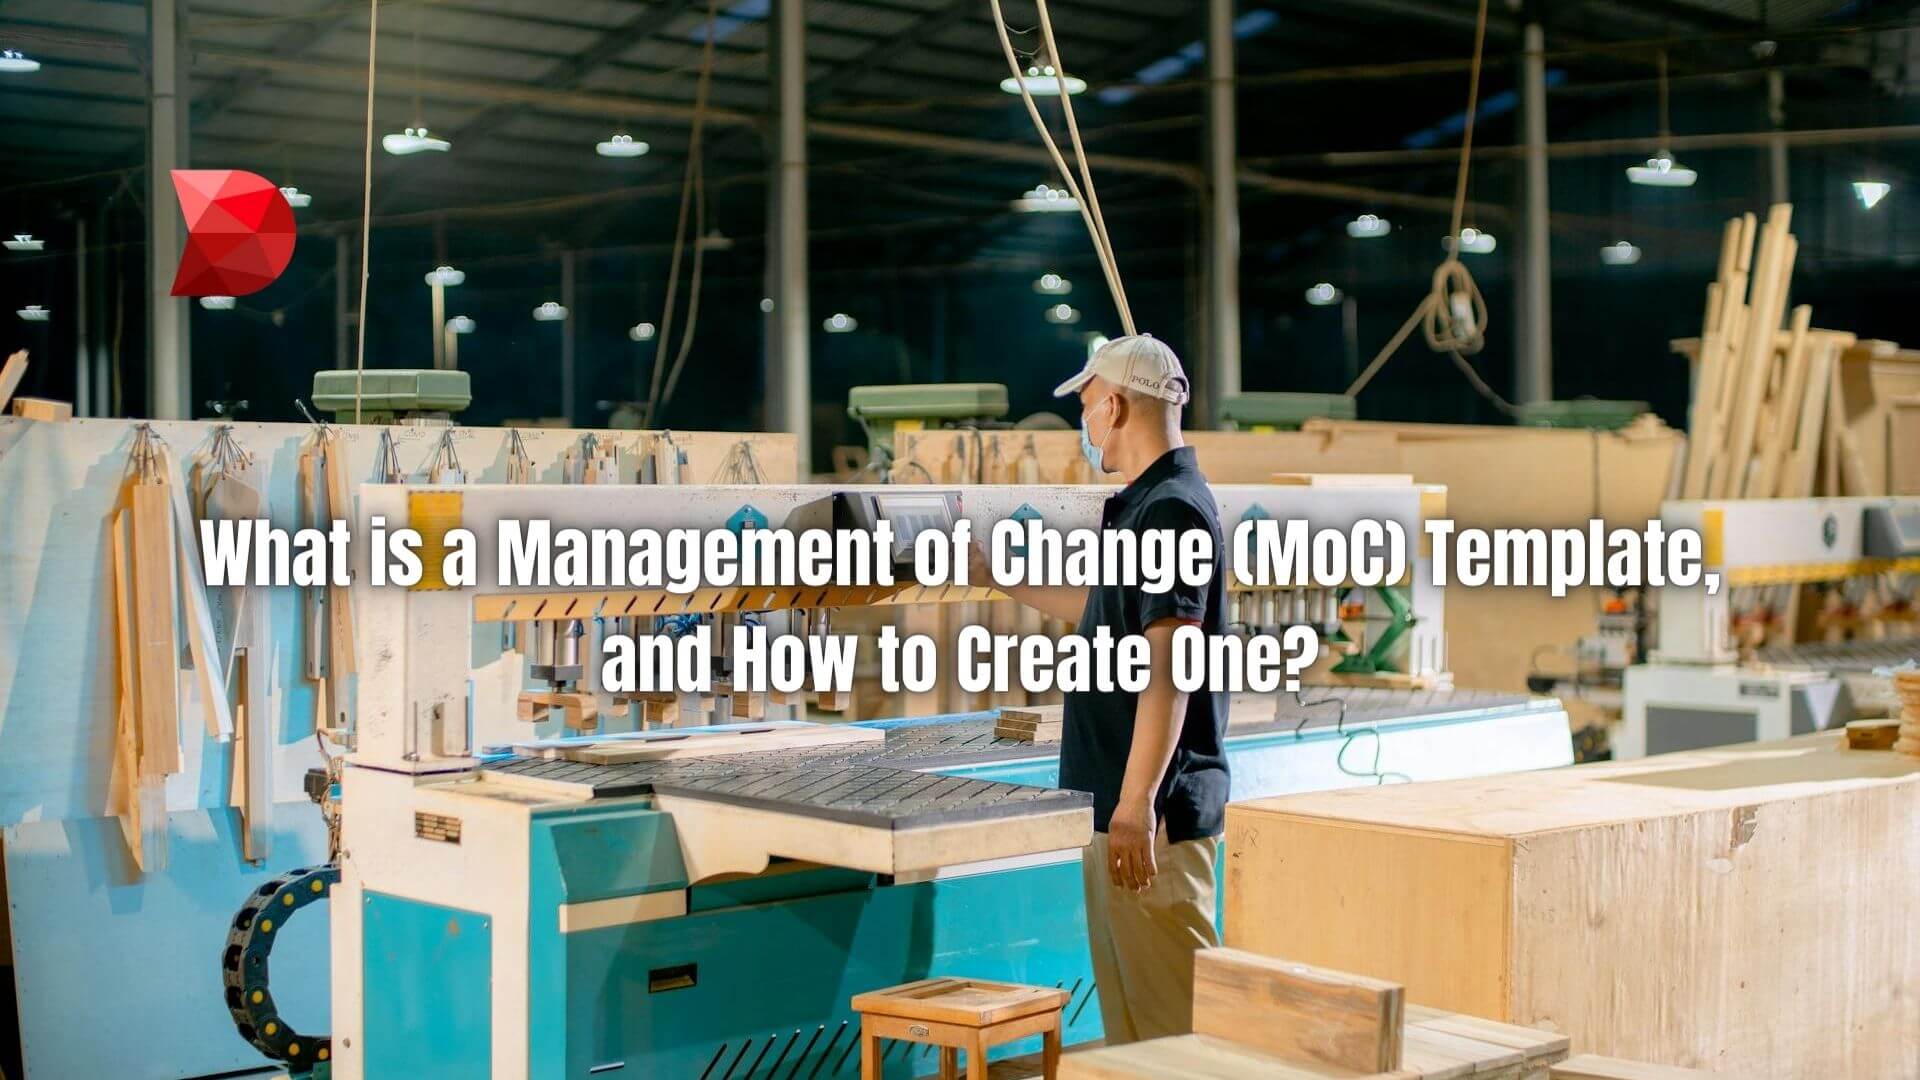 Empower your organization with a top-notch Management of Change (MoC) template. Learn how to create one effectively with our guide!